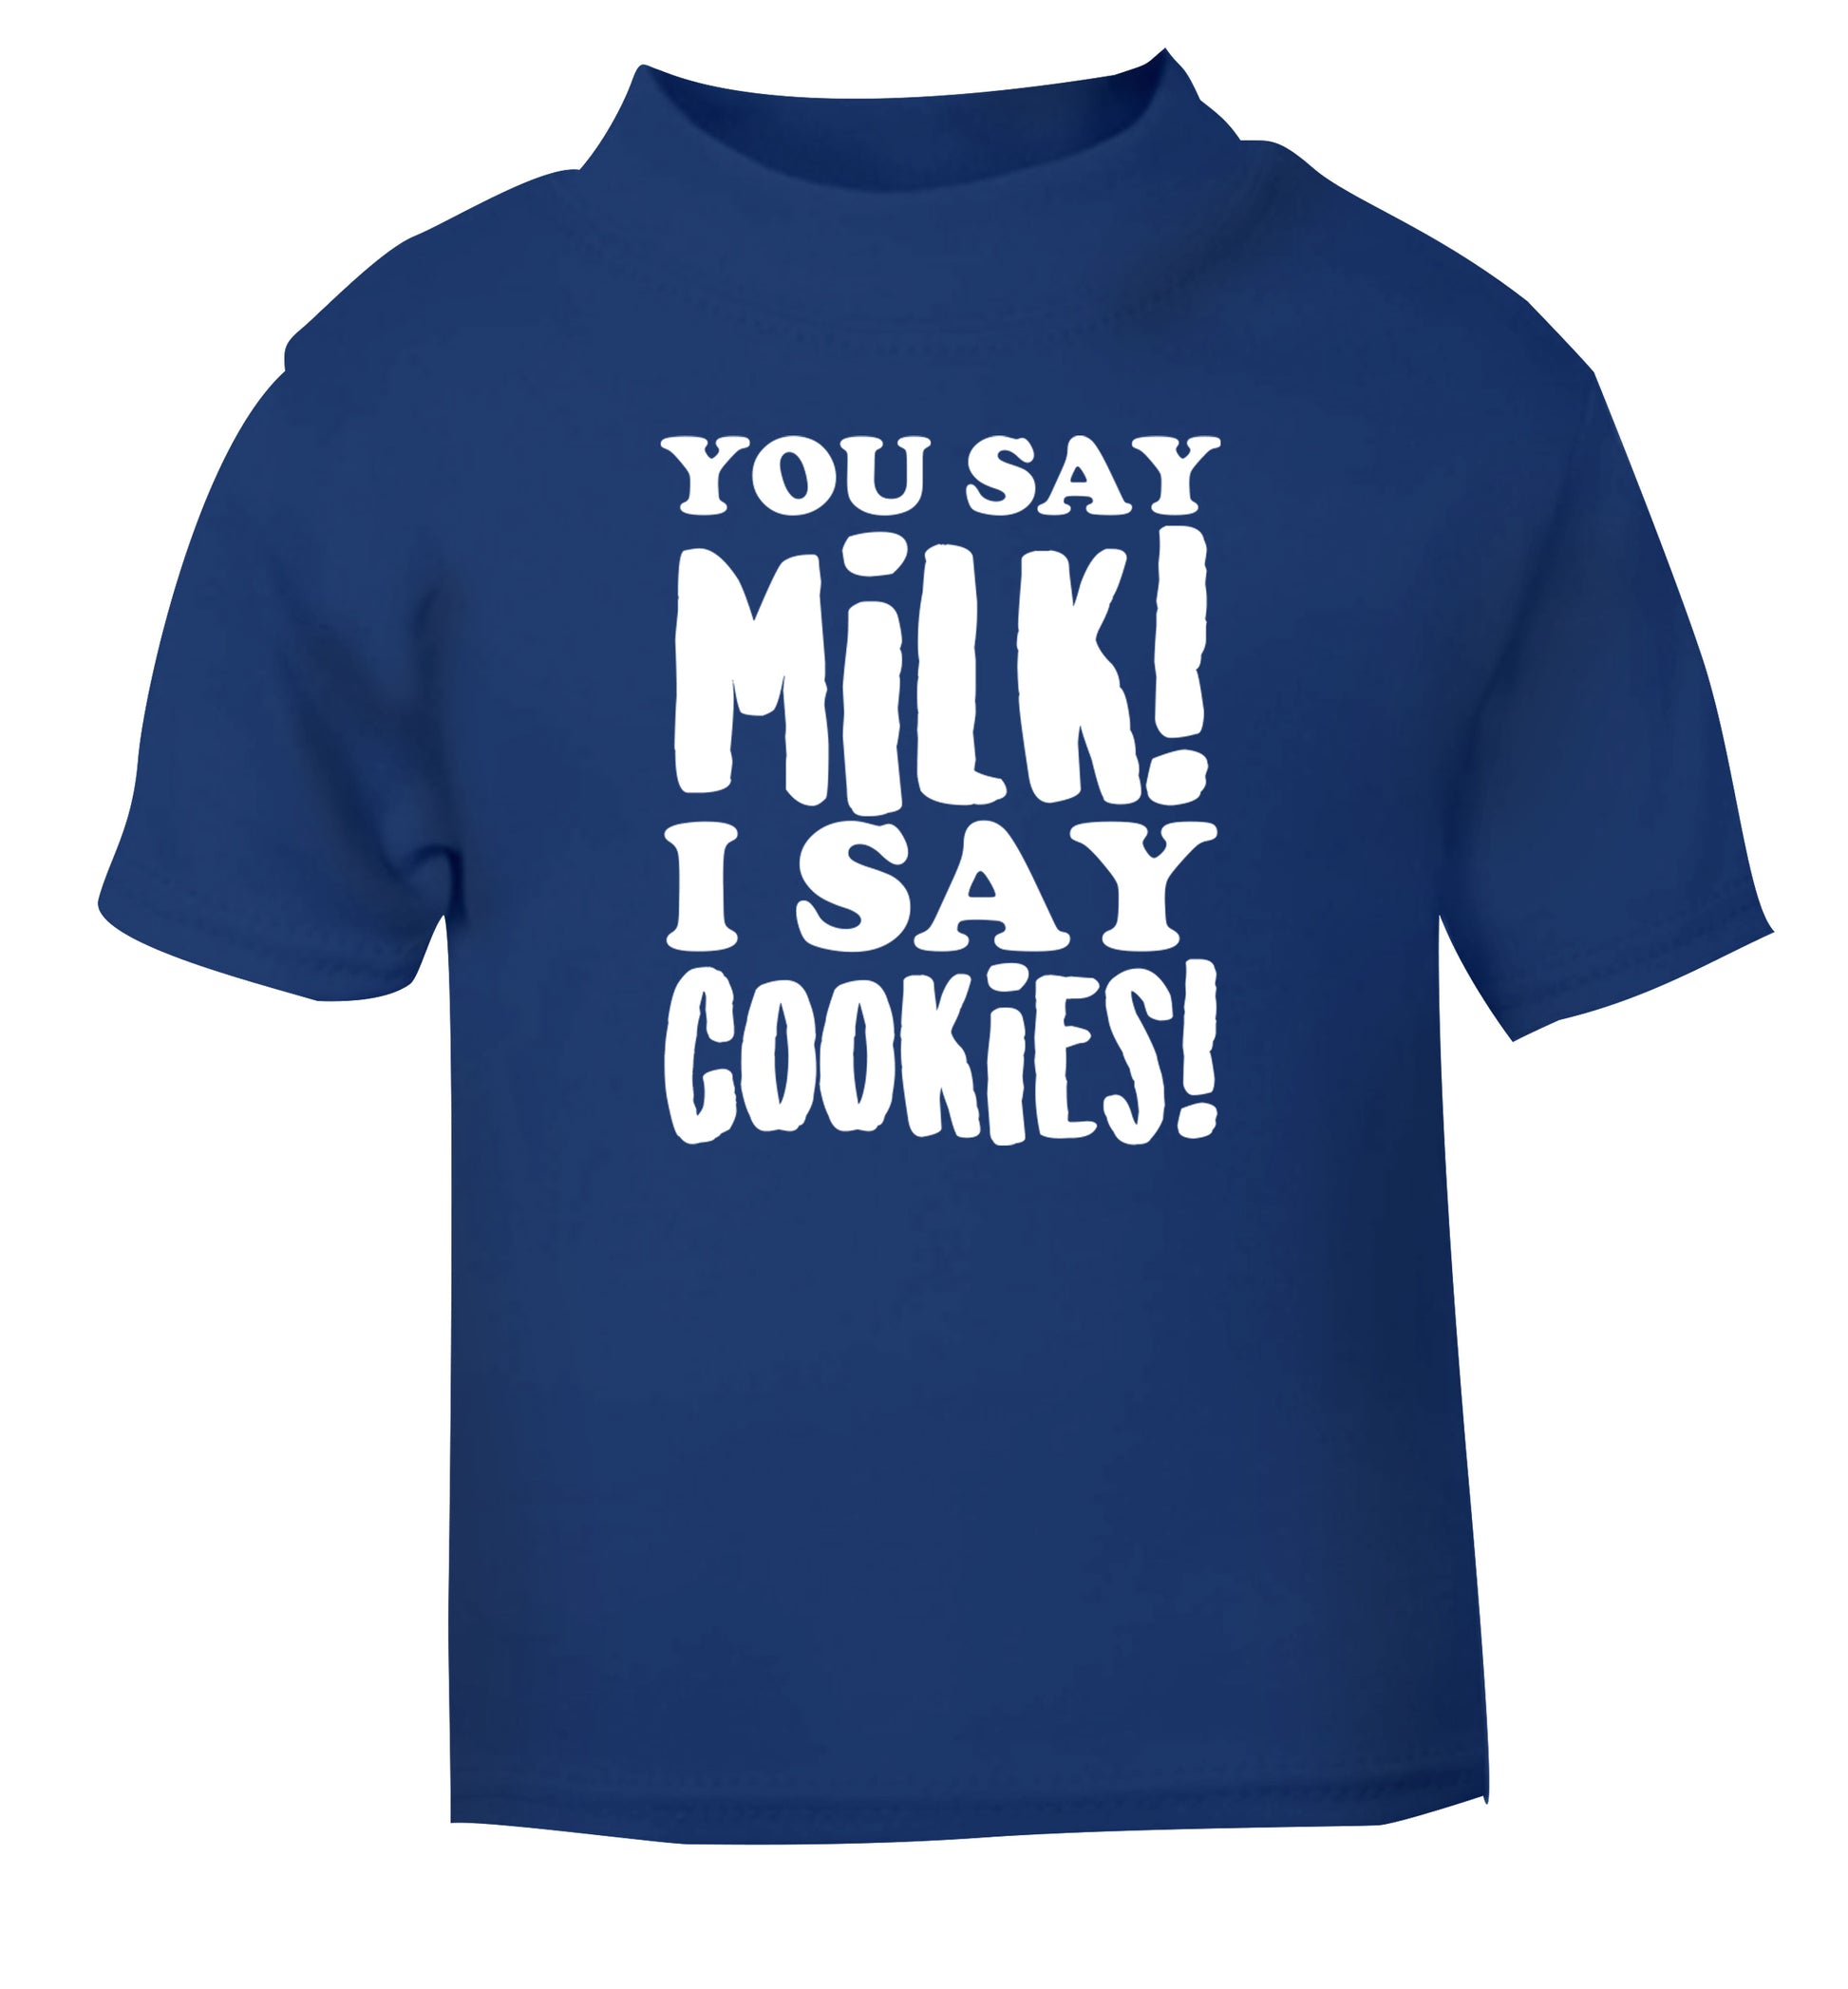 You say milk I say cookies! blue Baby Toddler Tshirt 2 Years